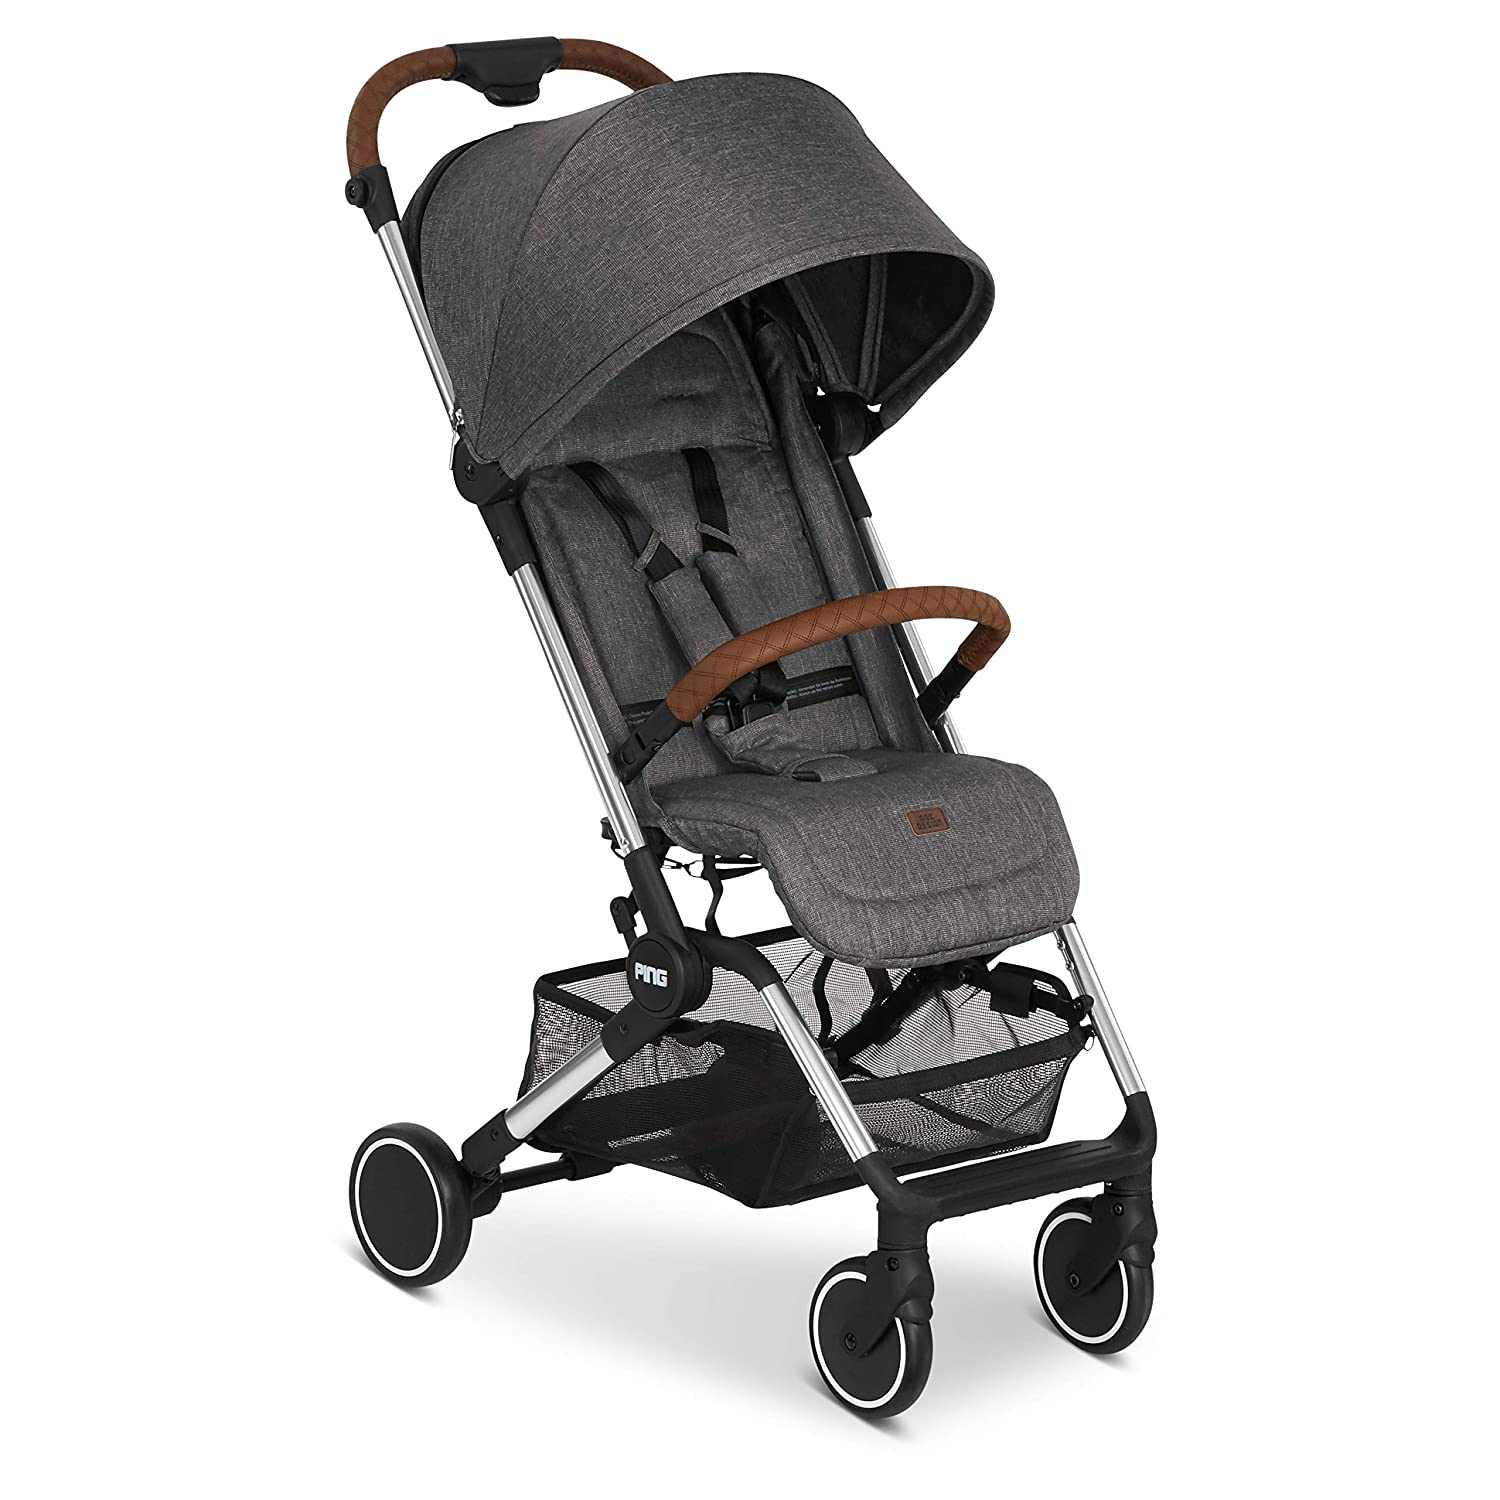 ABC Design Ping Diamond Edition Travel Buggy - Sports Buggy Ideal for Holidays - Reclining Position - Compact Folding Size with Transport Safety - From Birth to 15 kg - Colour: Asphalt